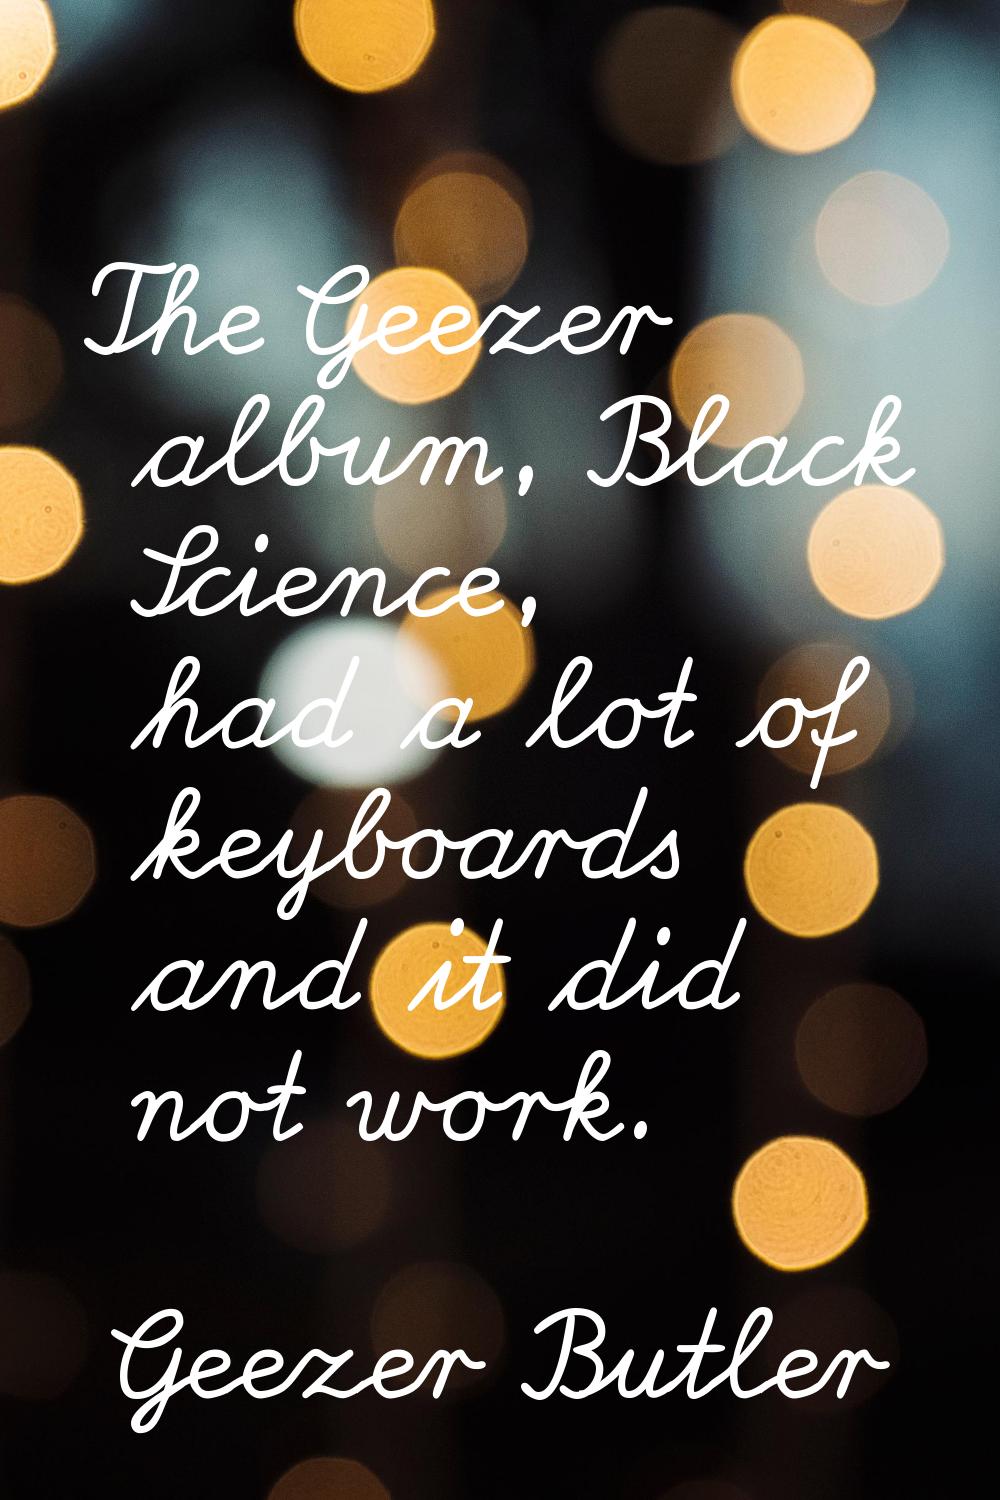 The Geezer album, Black Science, had a lot of keyboards and it did not work.